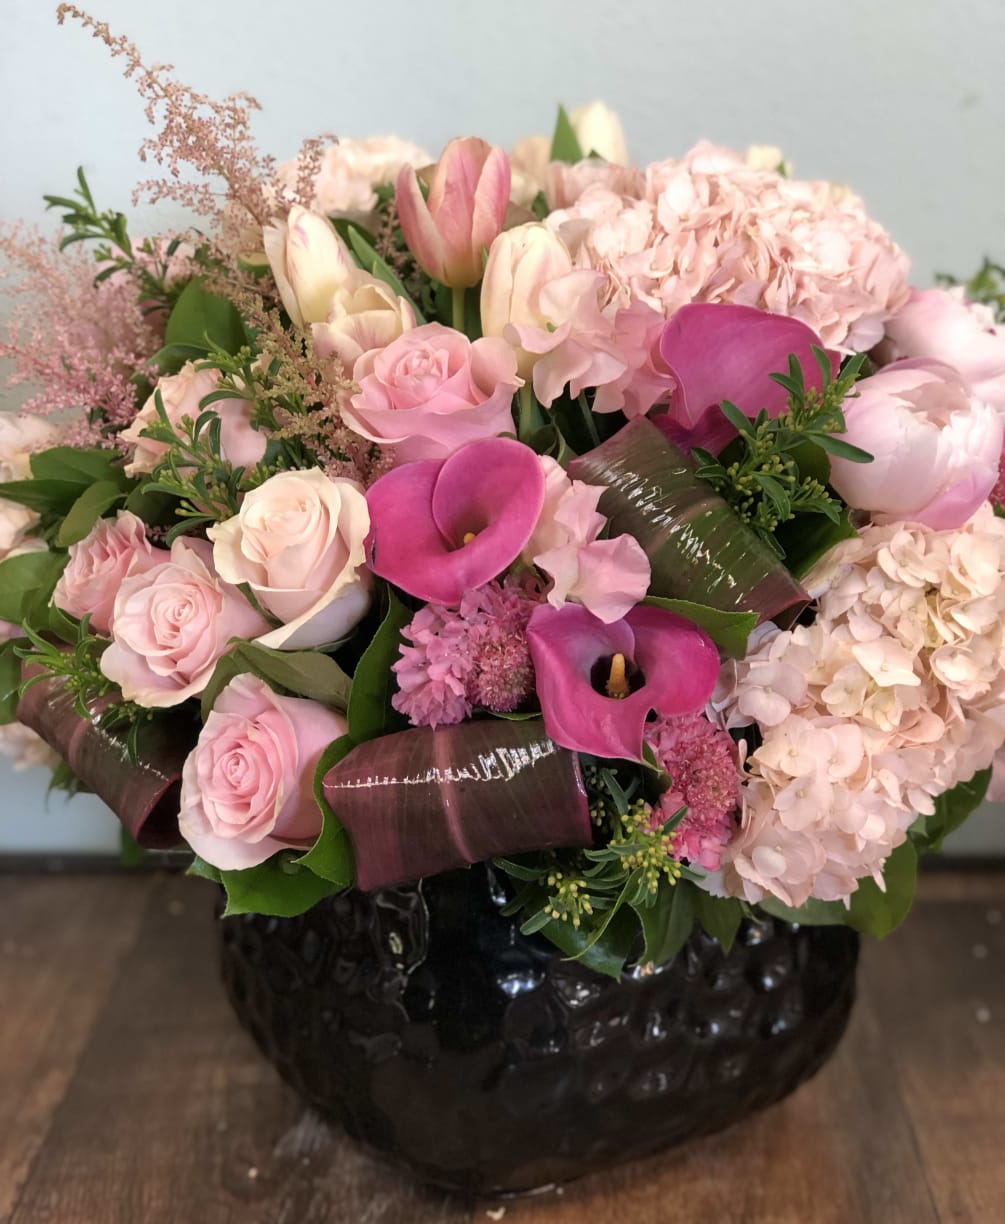 Beautiful combination of Hydrangedas, Roses, Callas, Lisianthus and other seasonal flowers in